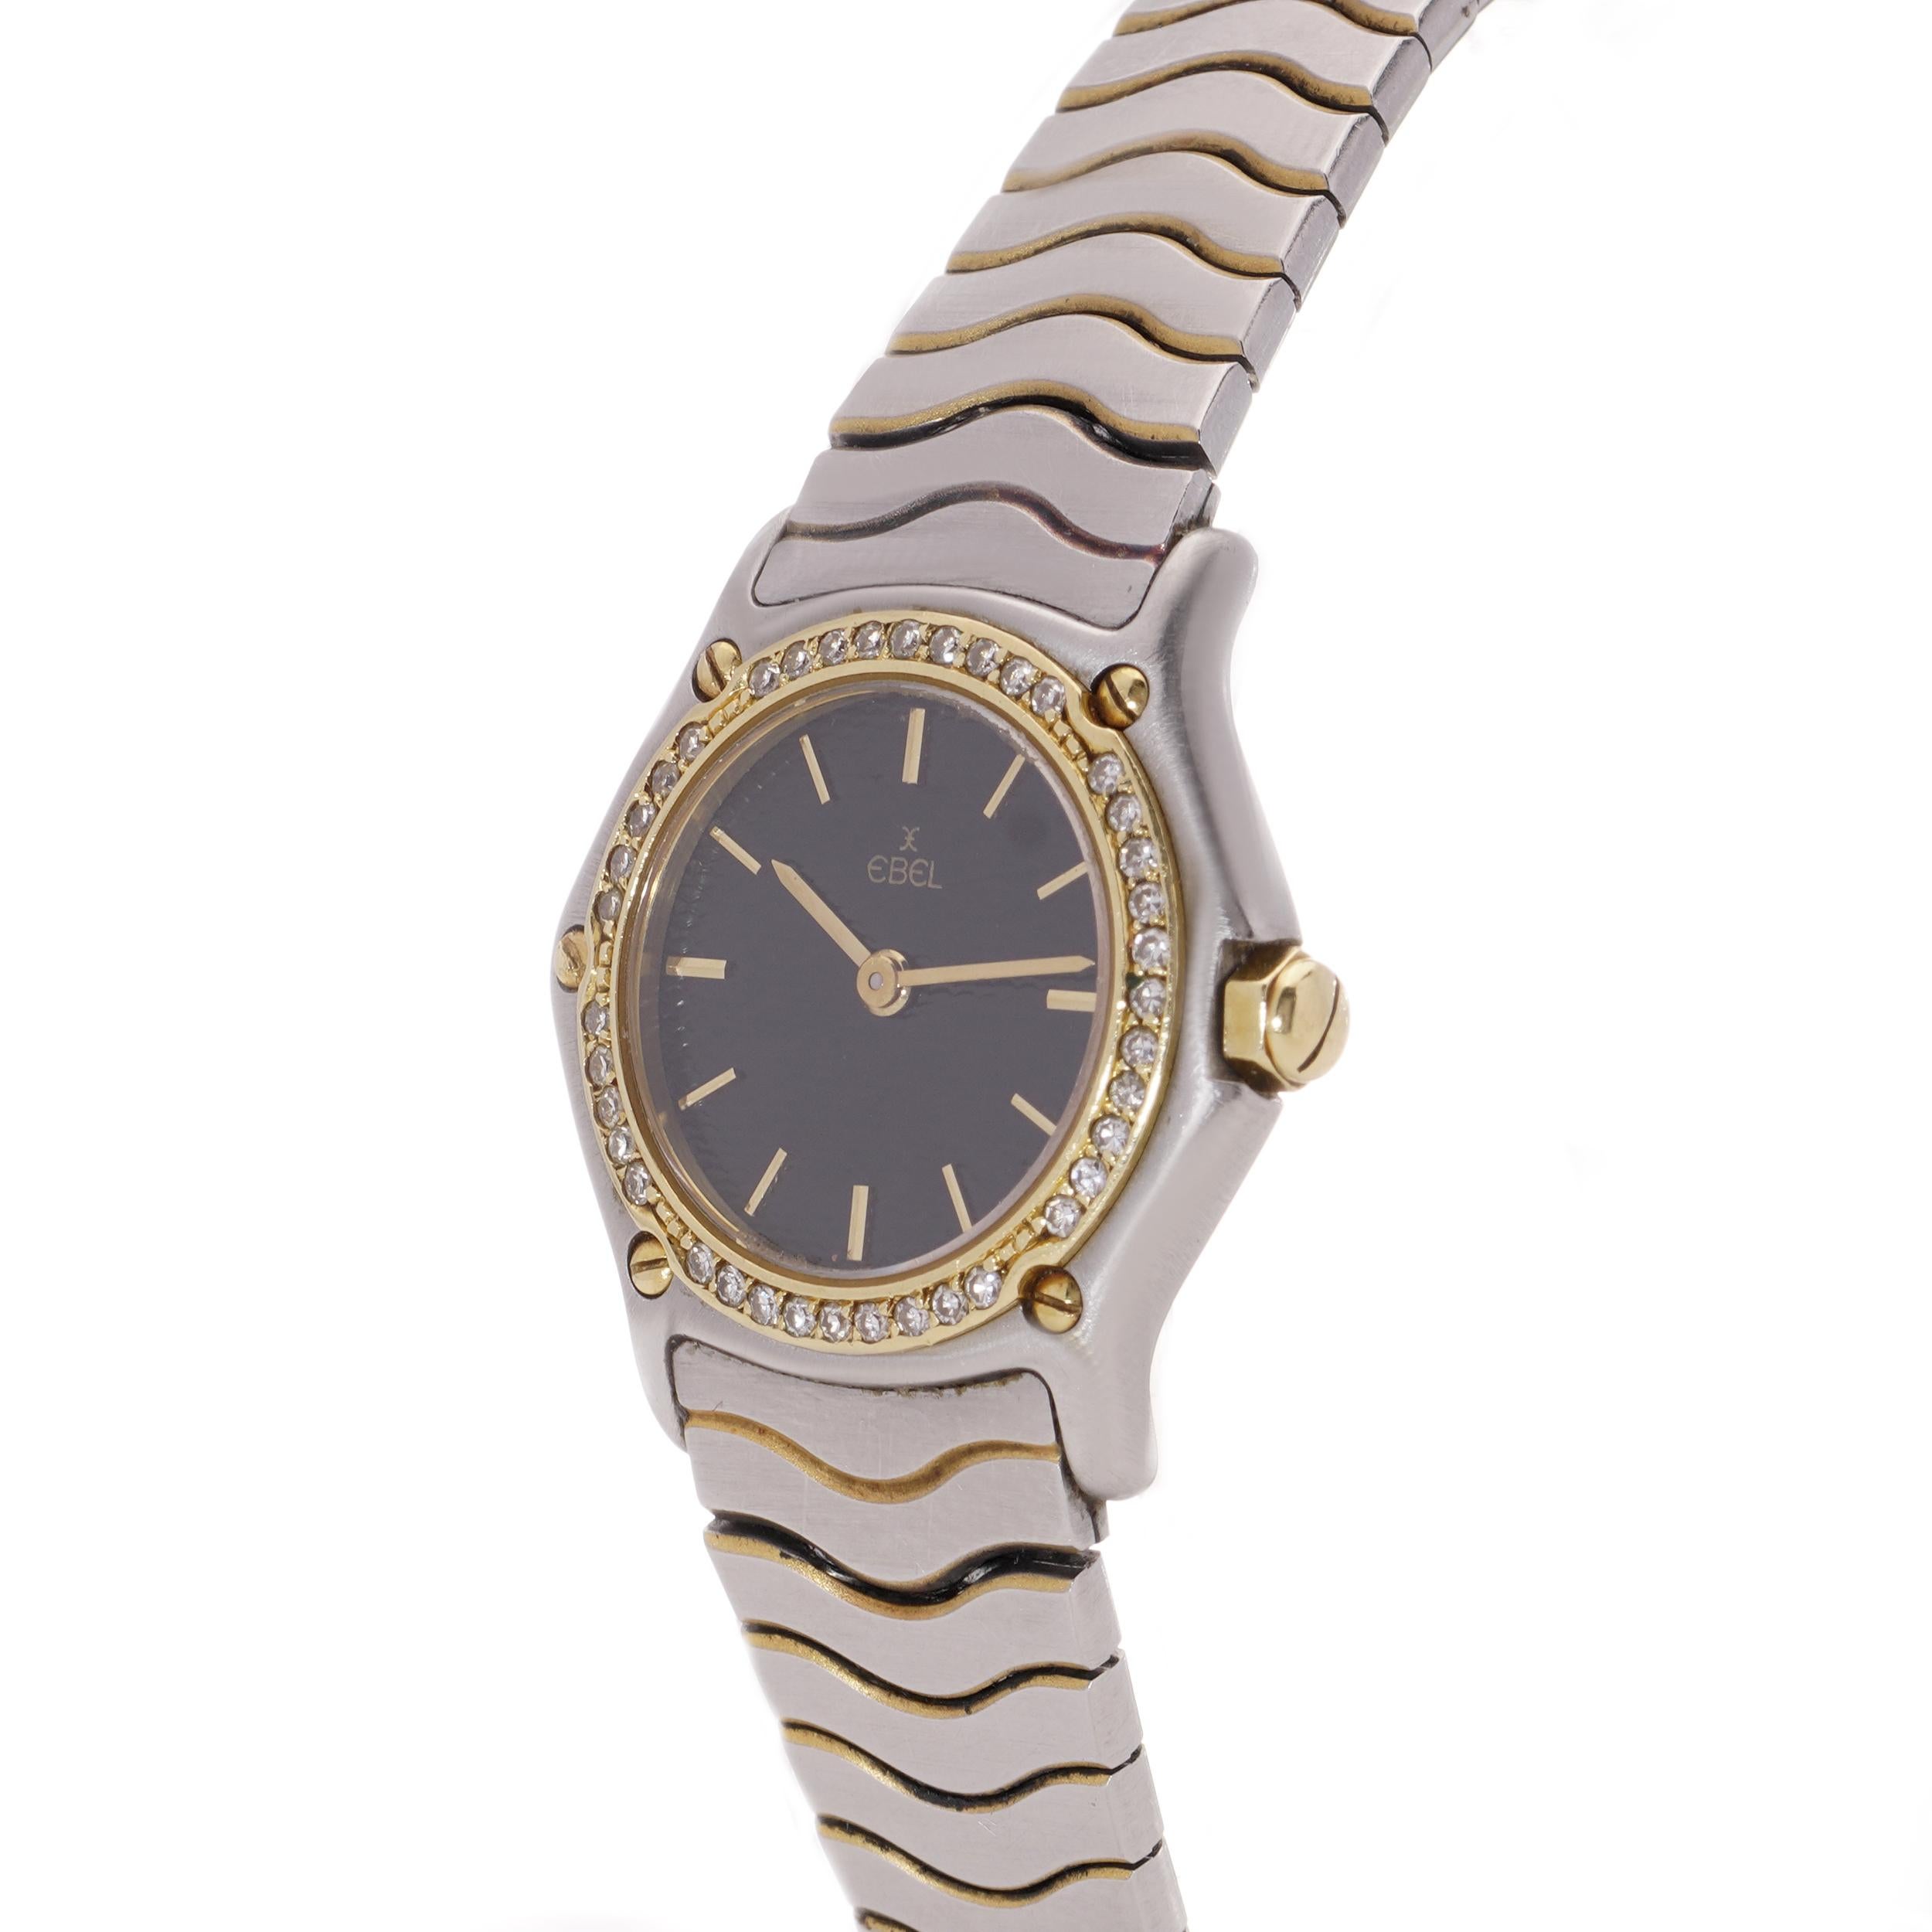 Brilliant Cut Ebel stainless steel and 18kt gold women's sports watch with diamond bezel 